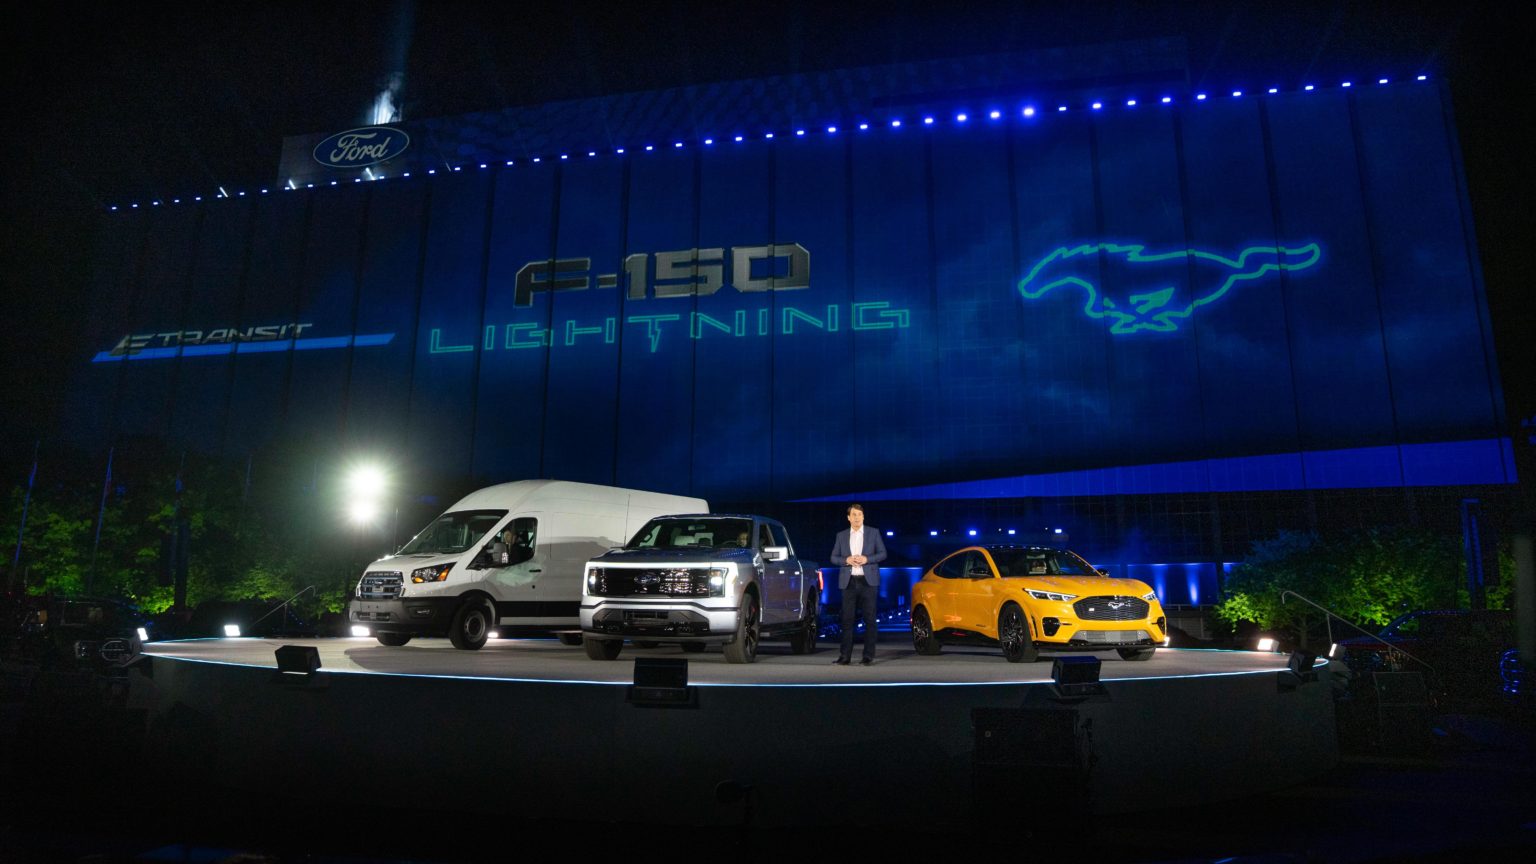 The F-150 Lightning is just one of several new EVs we'll see soon.